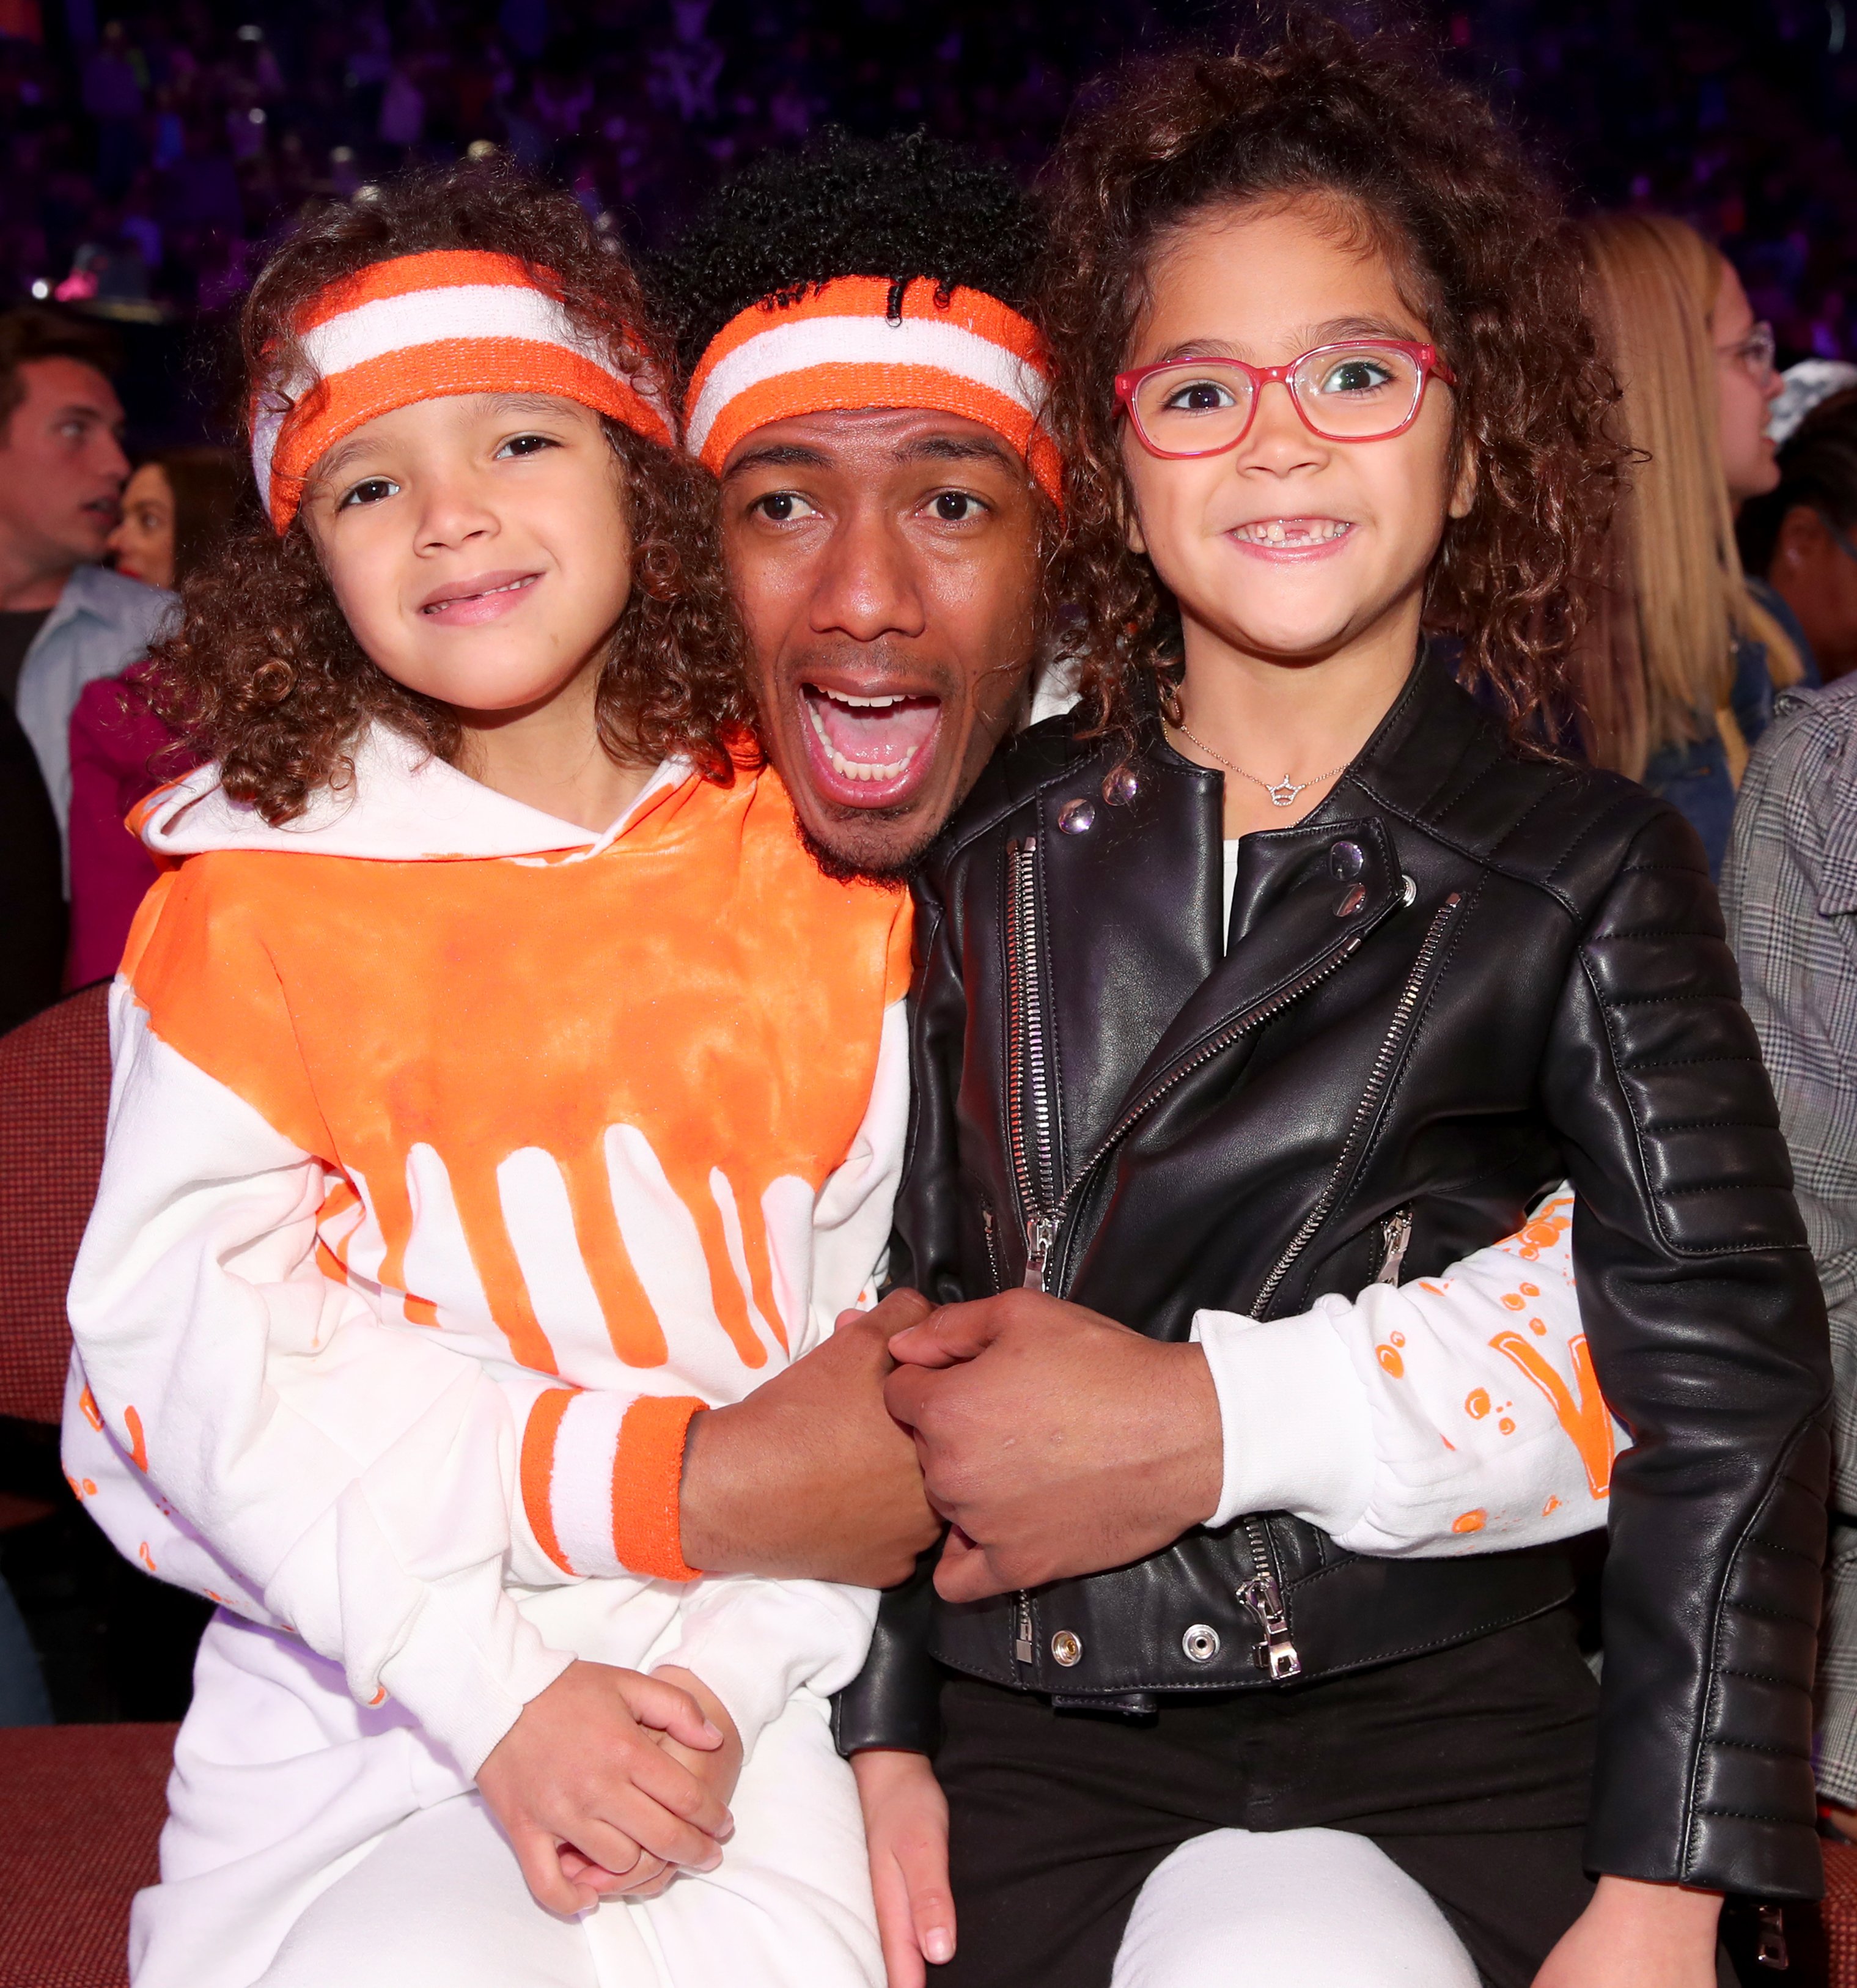 Moroccan Cannon, Nick Cannon, and Monroe Cannon onstage at Nickelodeon's 2018 Kids' Choice Awards at The Forum on March 24, 2018 in Inglewood, California. | Source: Getty Images